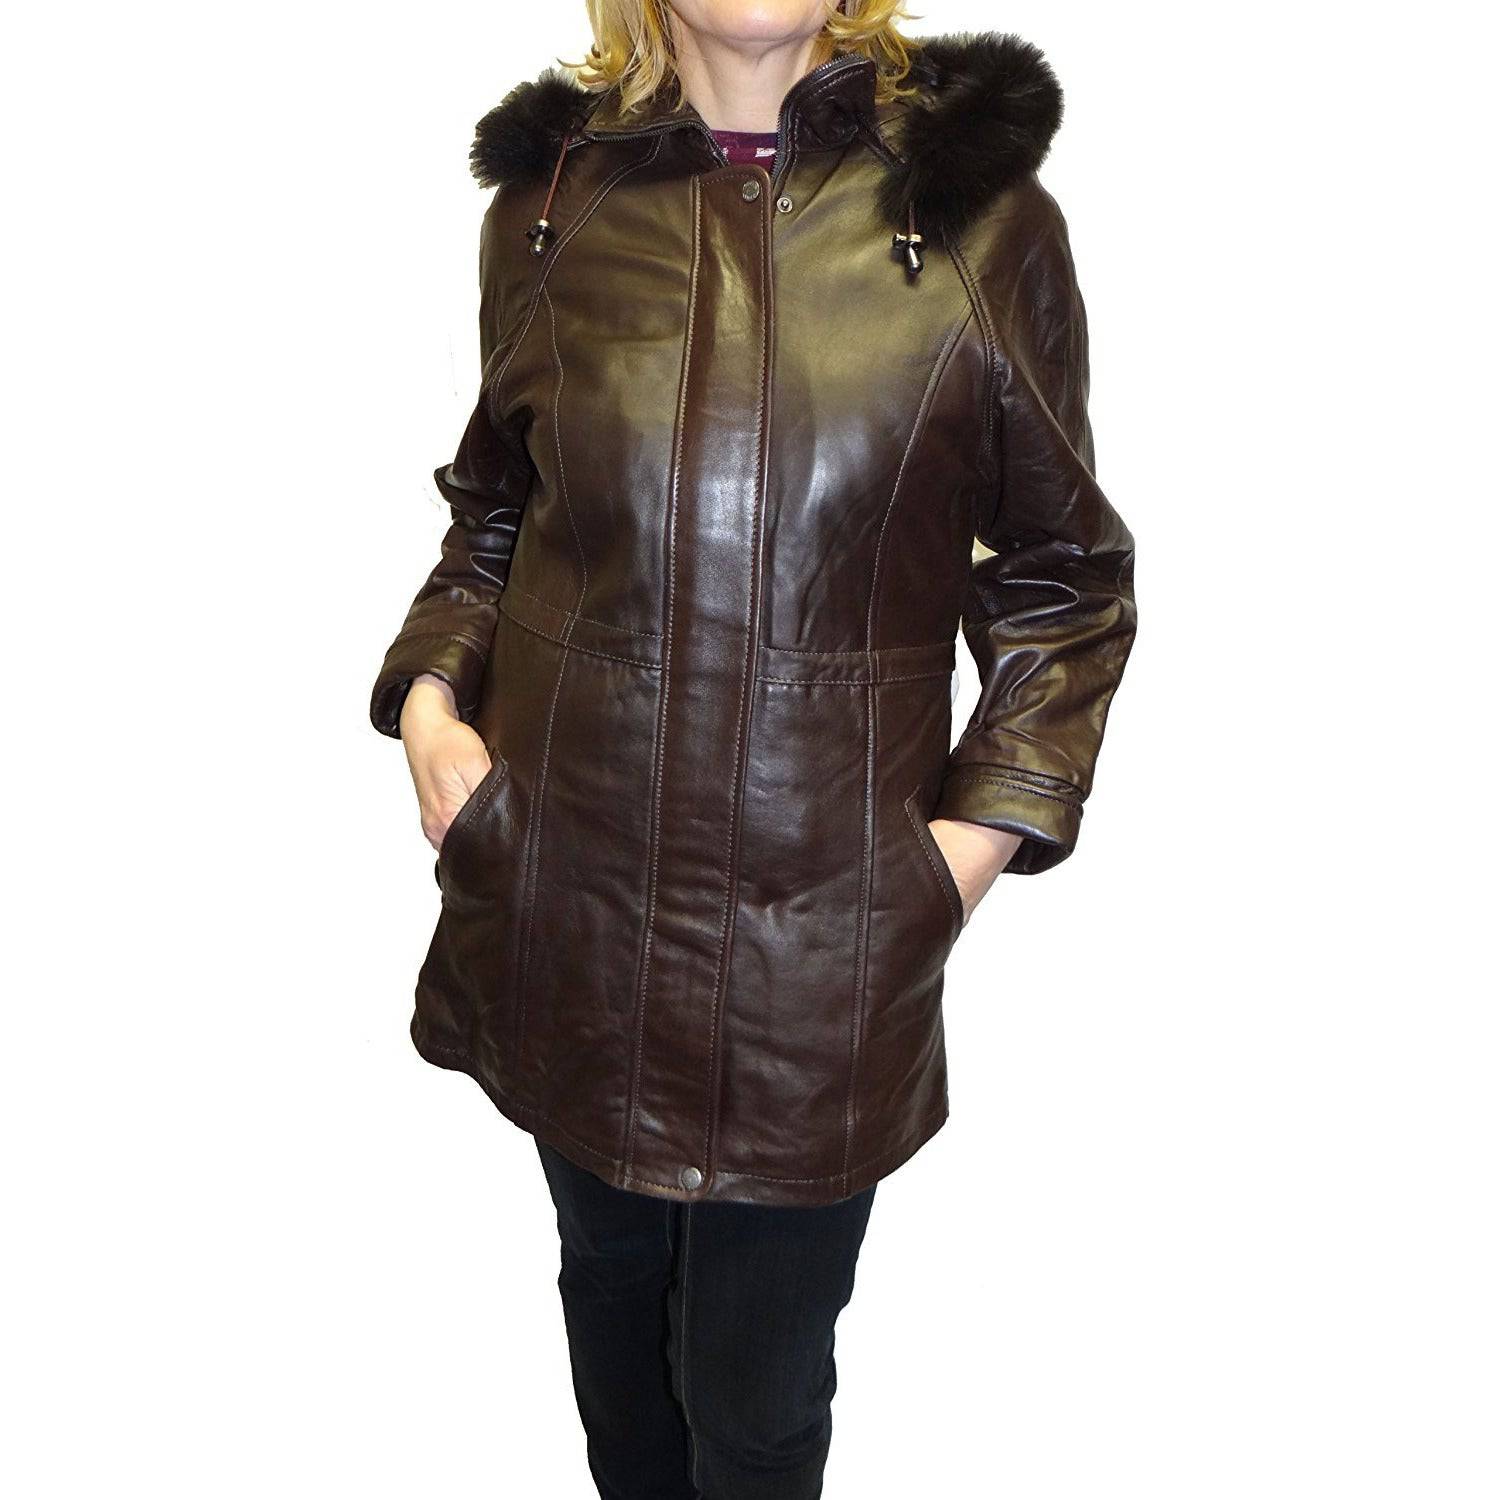 Knoles&Carter Women's Fox Fur Hooded Leather Jacket - Zooloo Leather